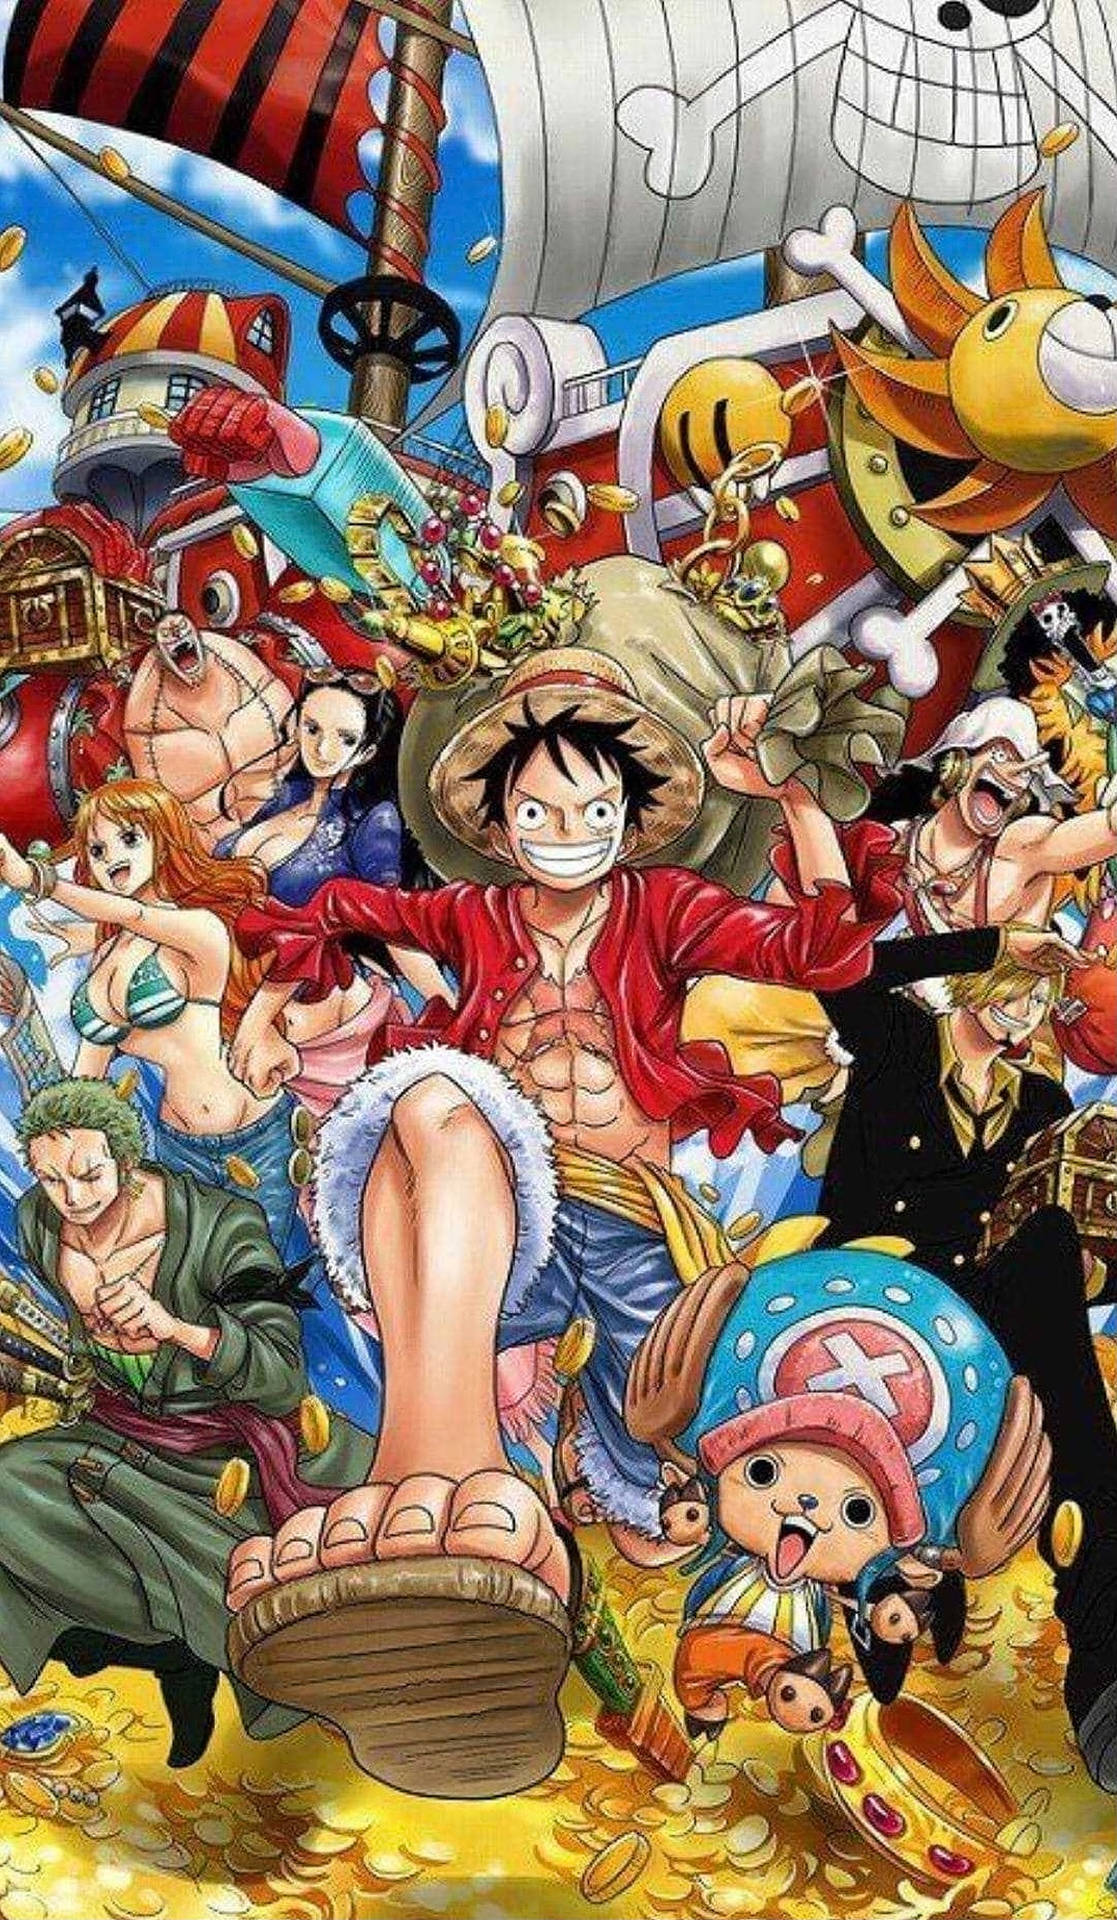 Free One Piece Iphone Wallpaper Downloads, [200+] One Piece Iphone  Wallpapers for FREE 